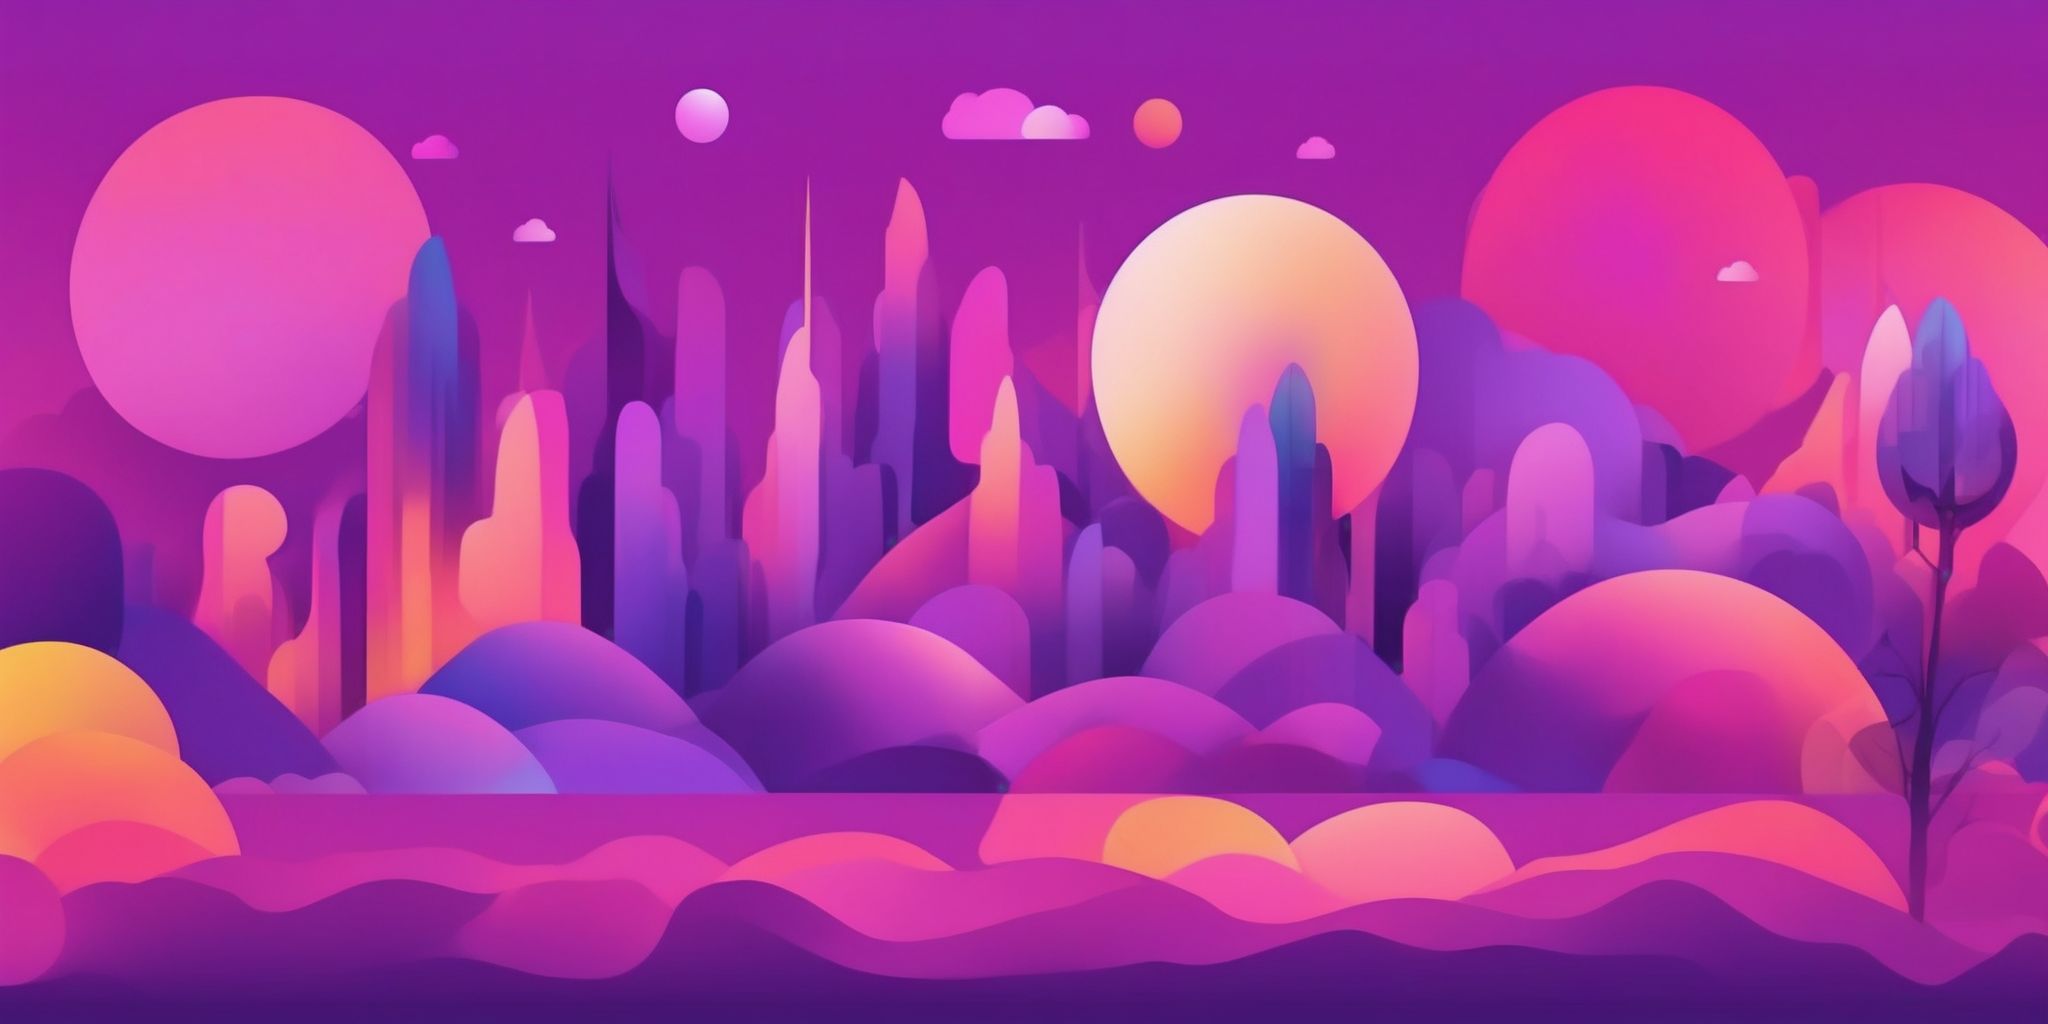 Echo in flat illustration style, colorful purple gradient colors